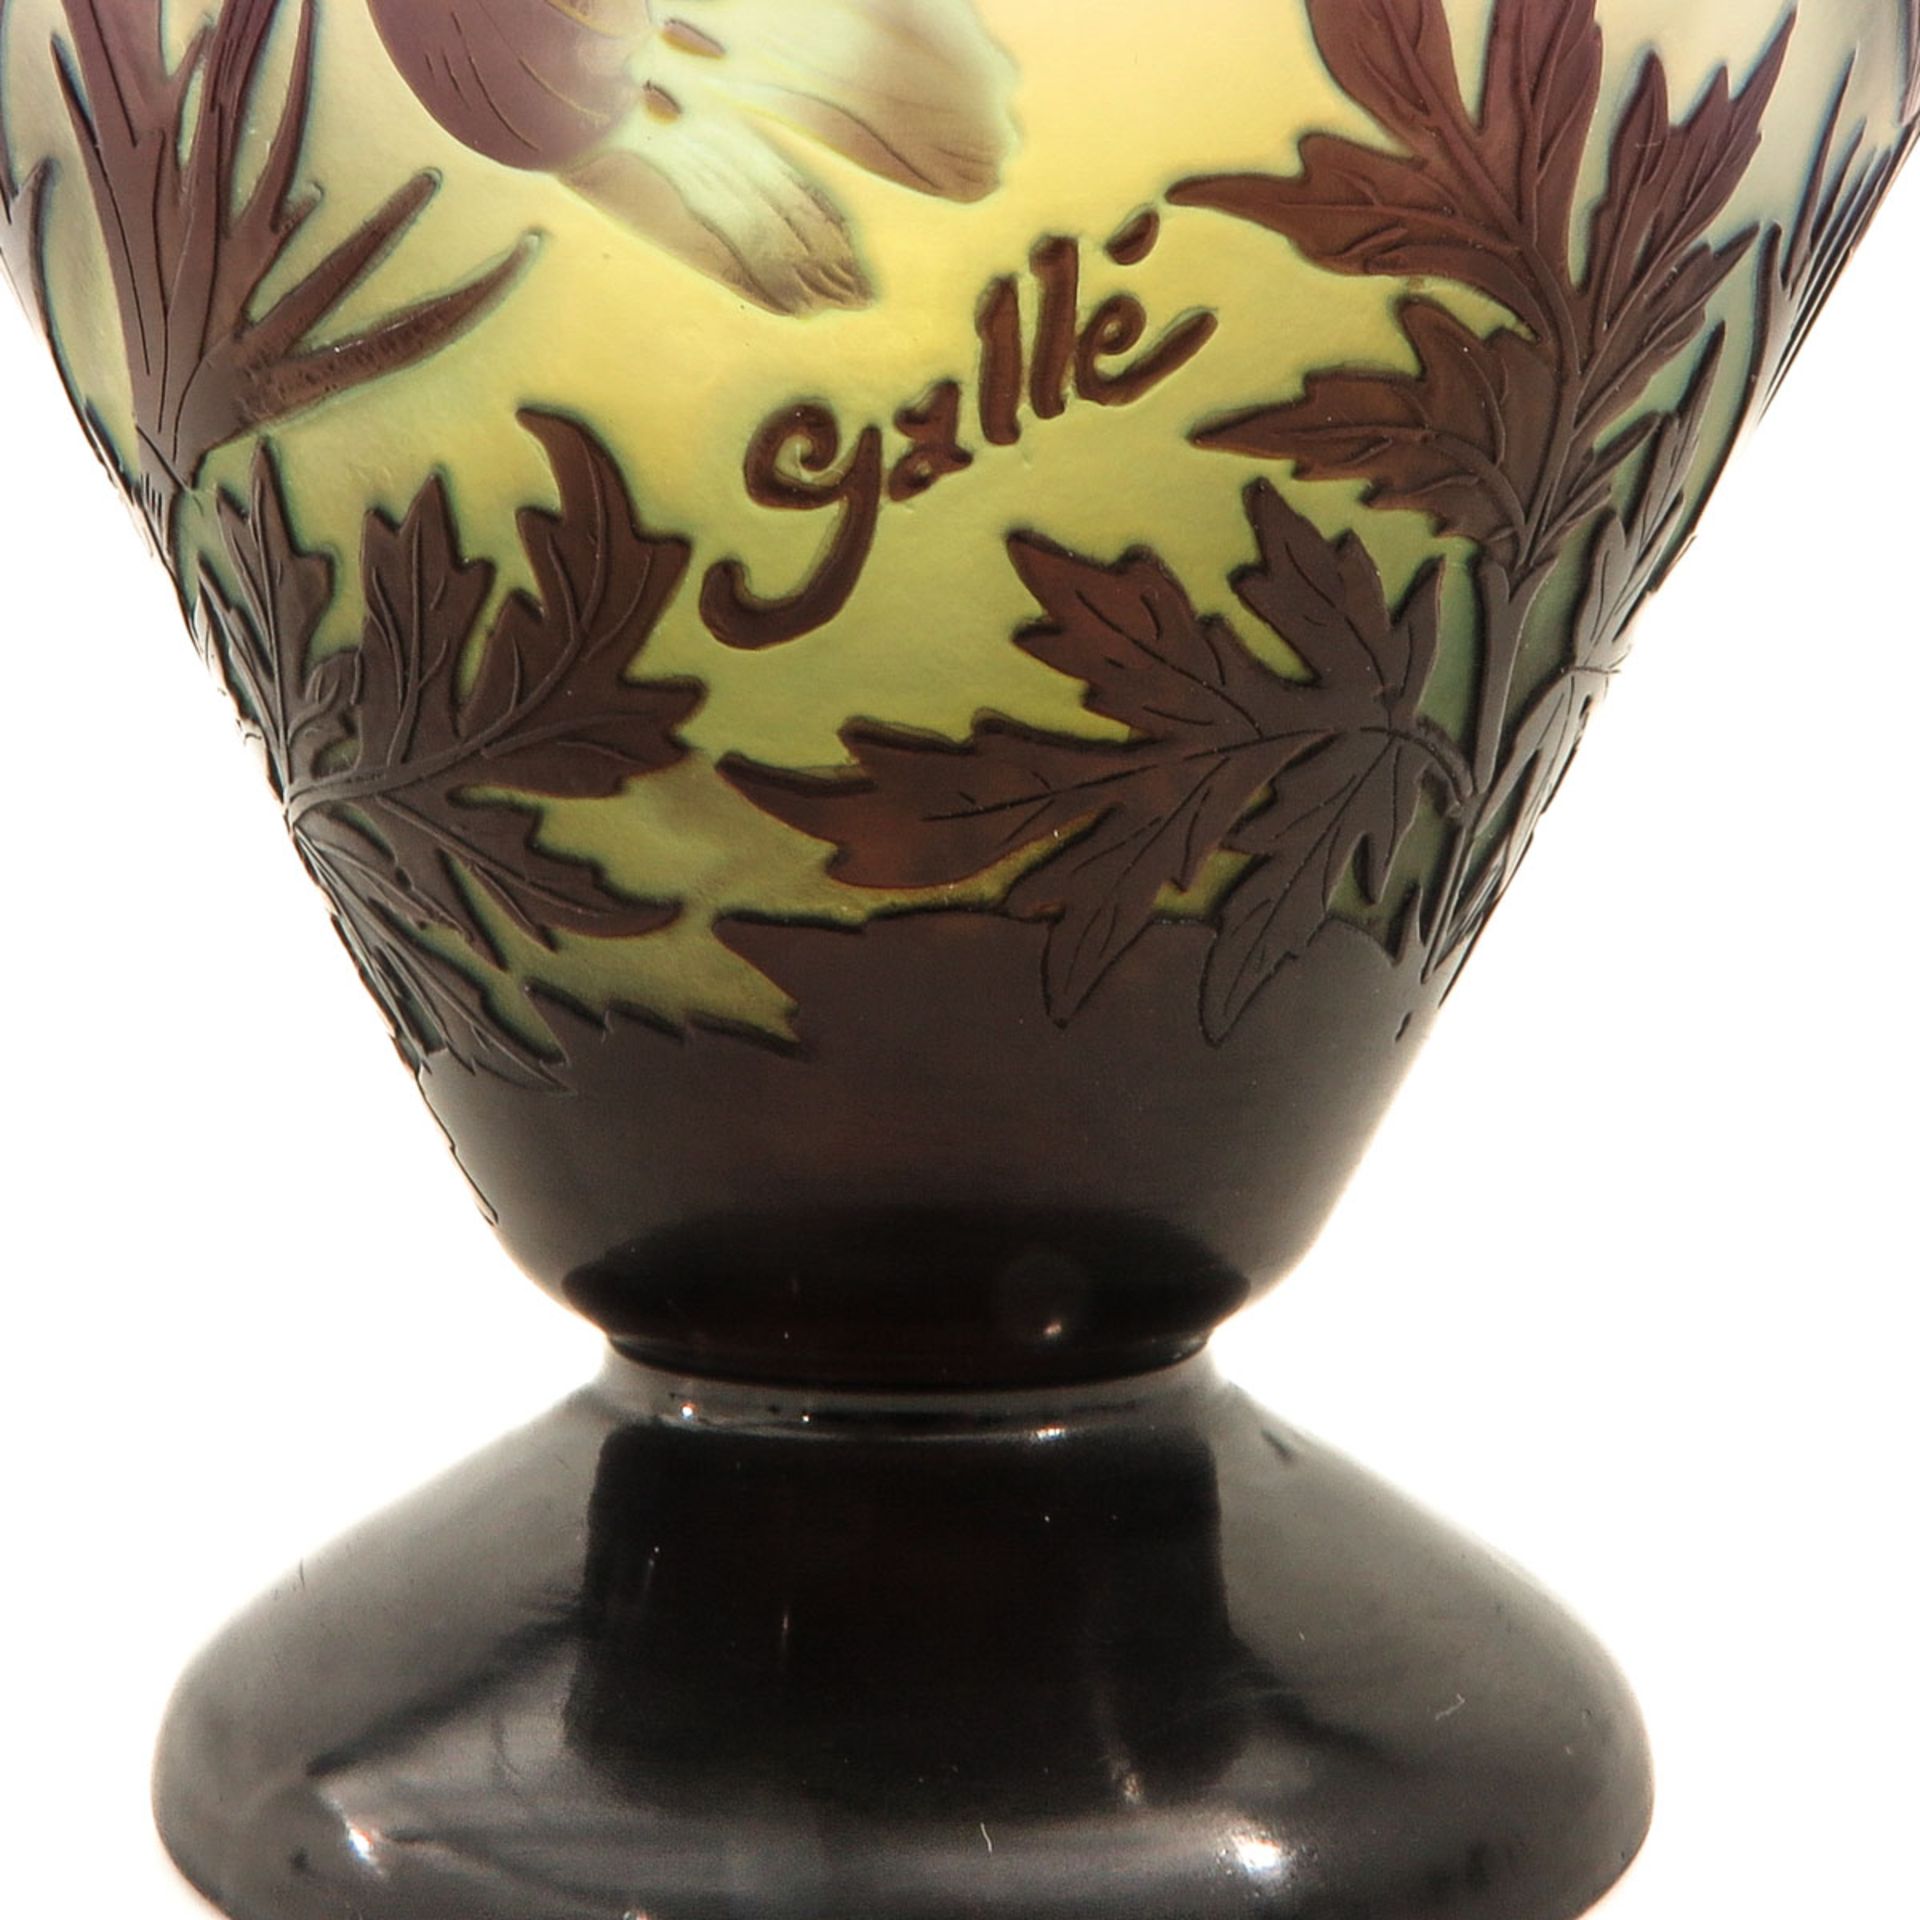 A Signed Galle Vase - Image 7 of 8